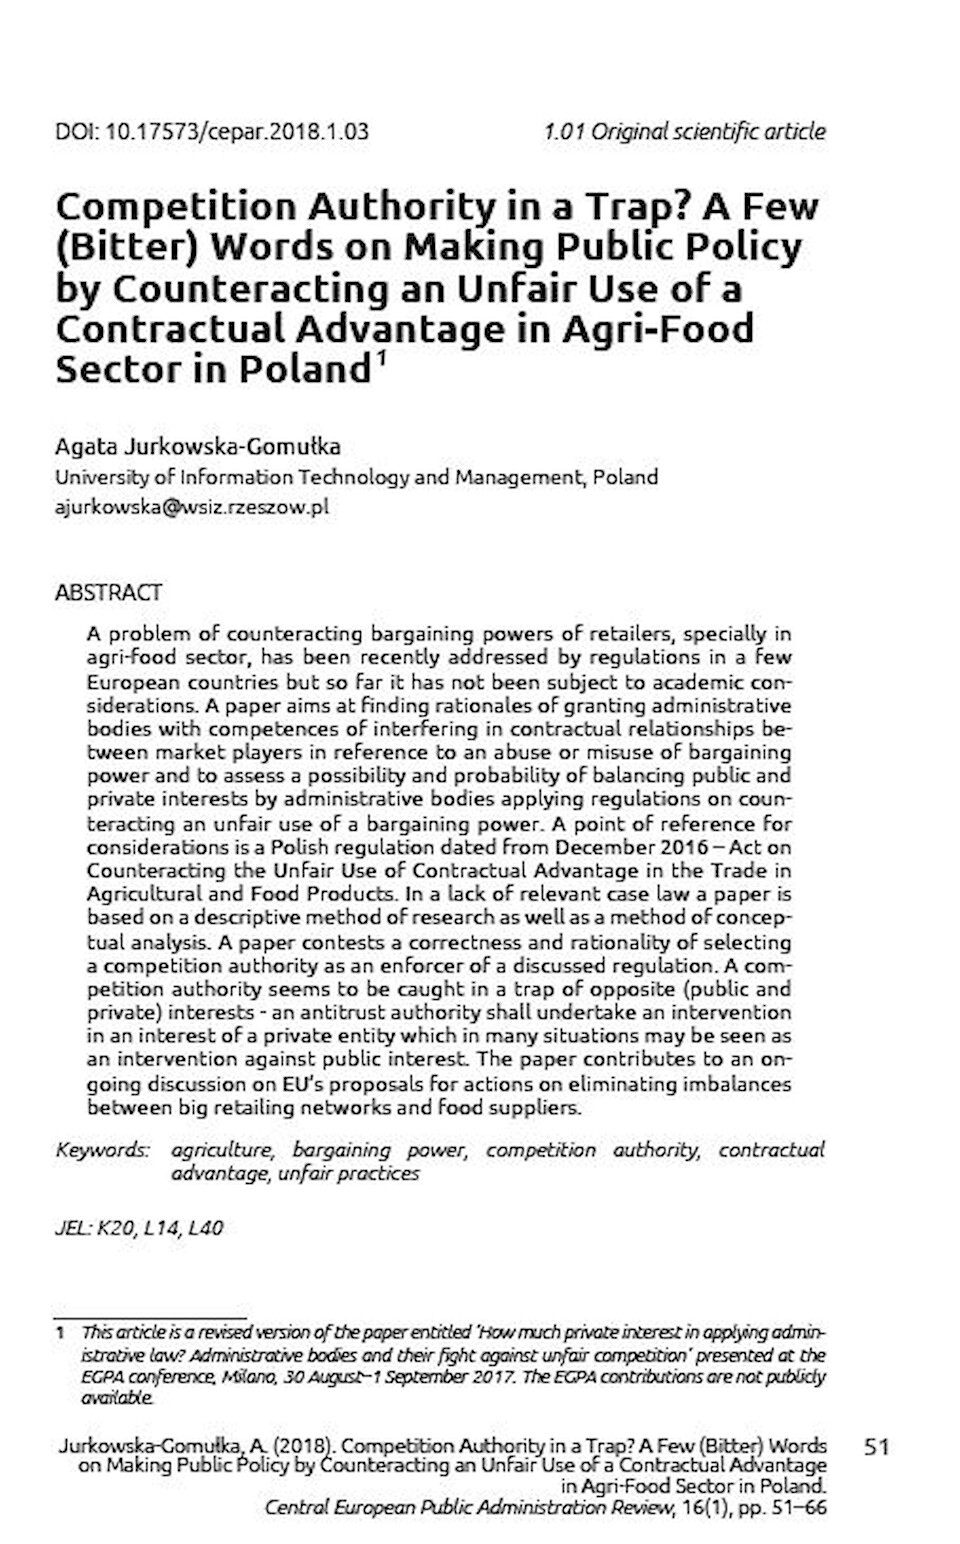 Competition authority in a trap? A few (bitter) words on making public policy by counteracting an unfair use of a contractual advantage in agri-food sector in Poland